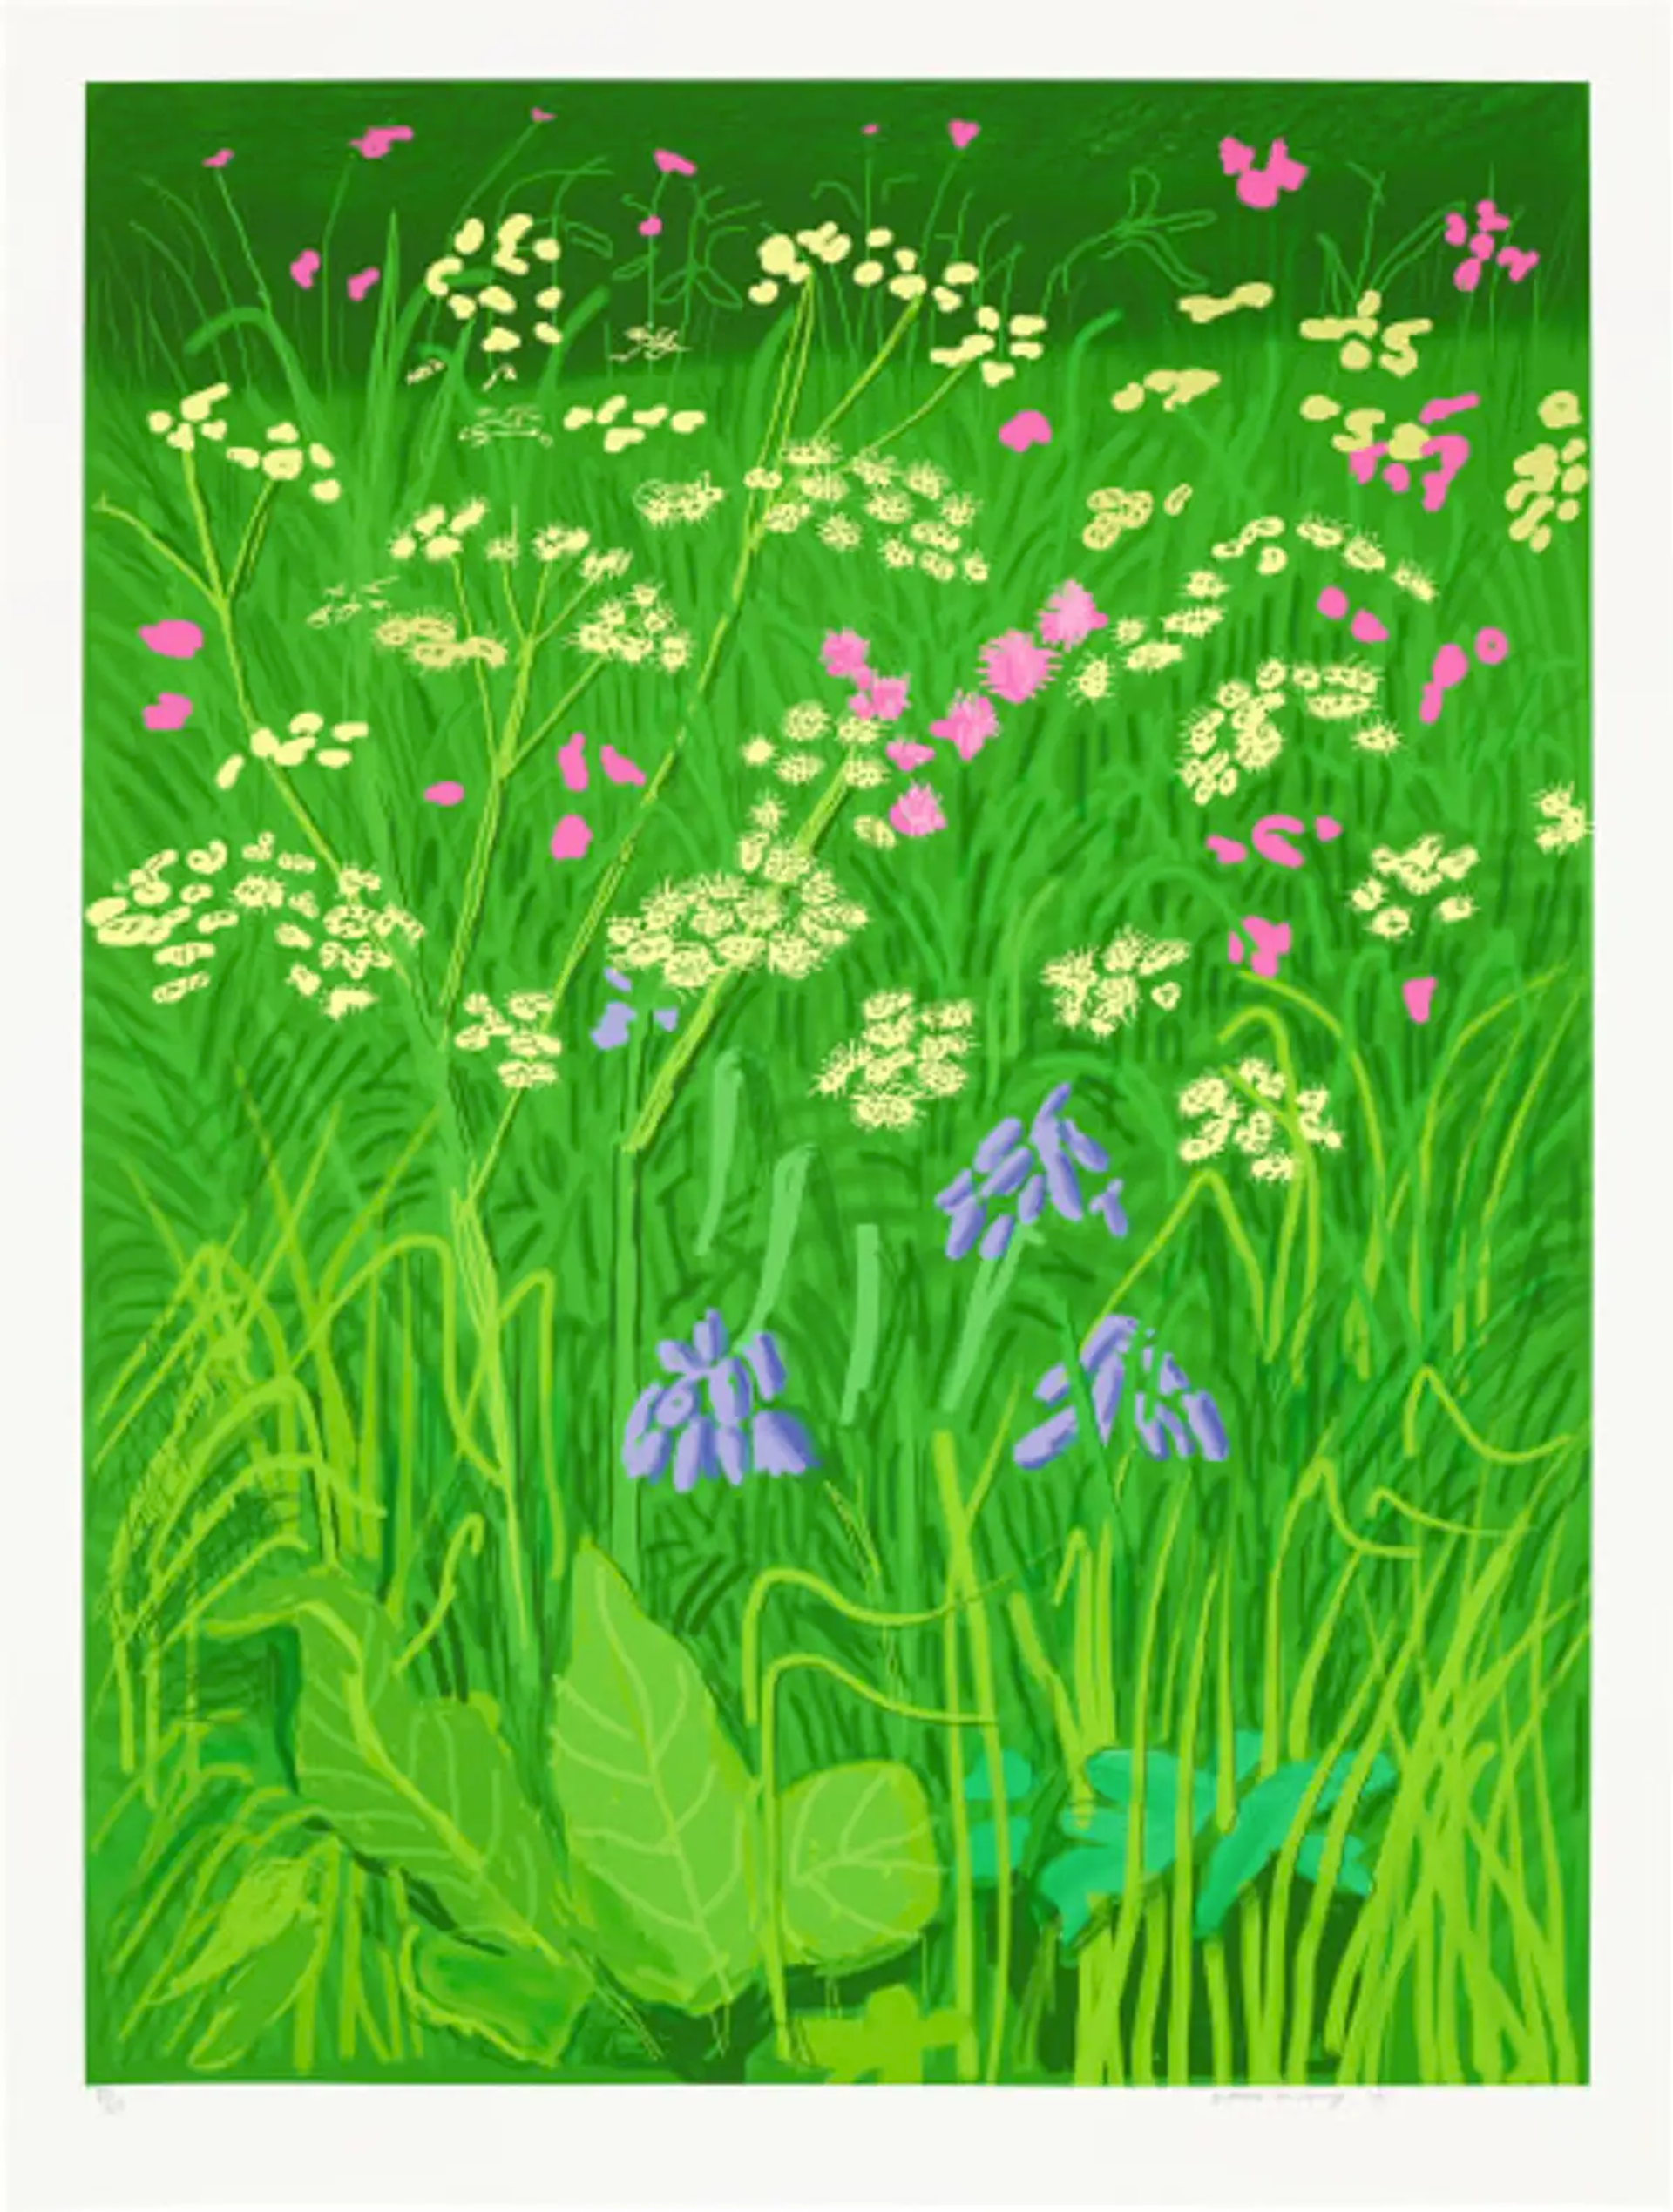 This print by David Hockney shows a garden scene, with three different types of wildflowers -- in pink, white and purple.